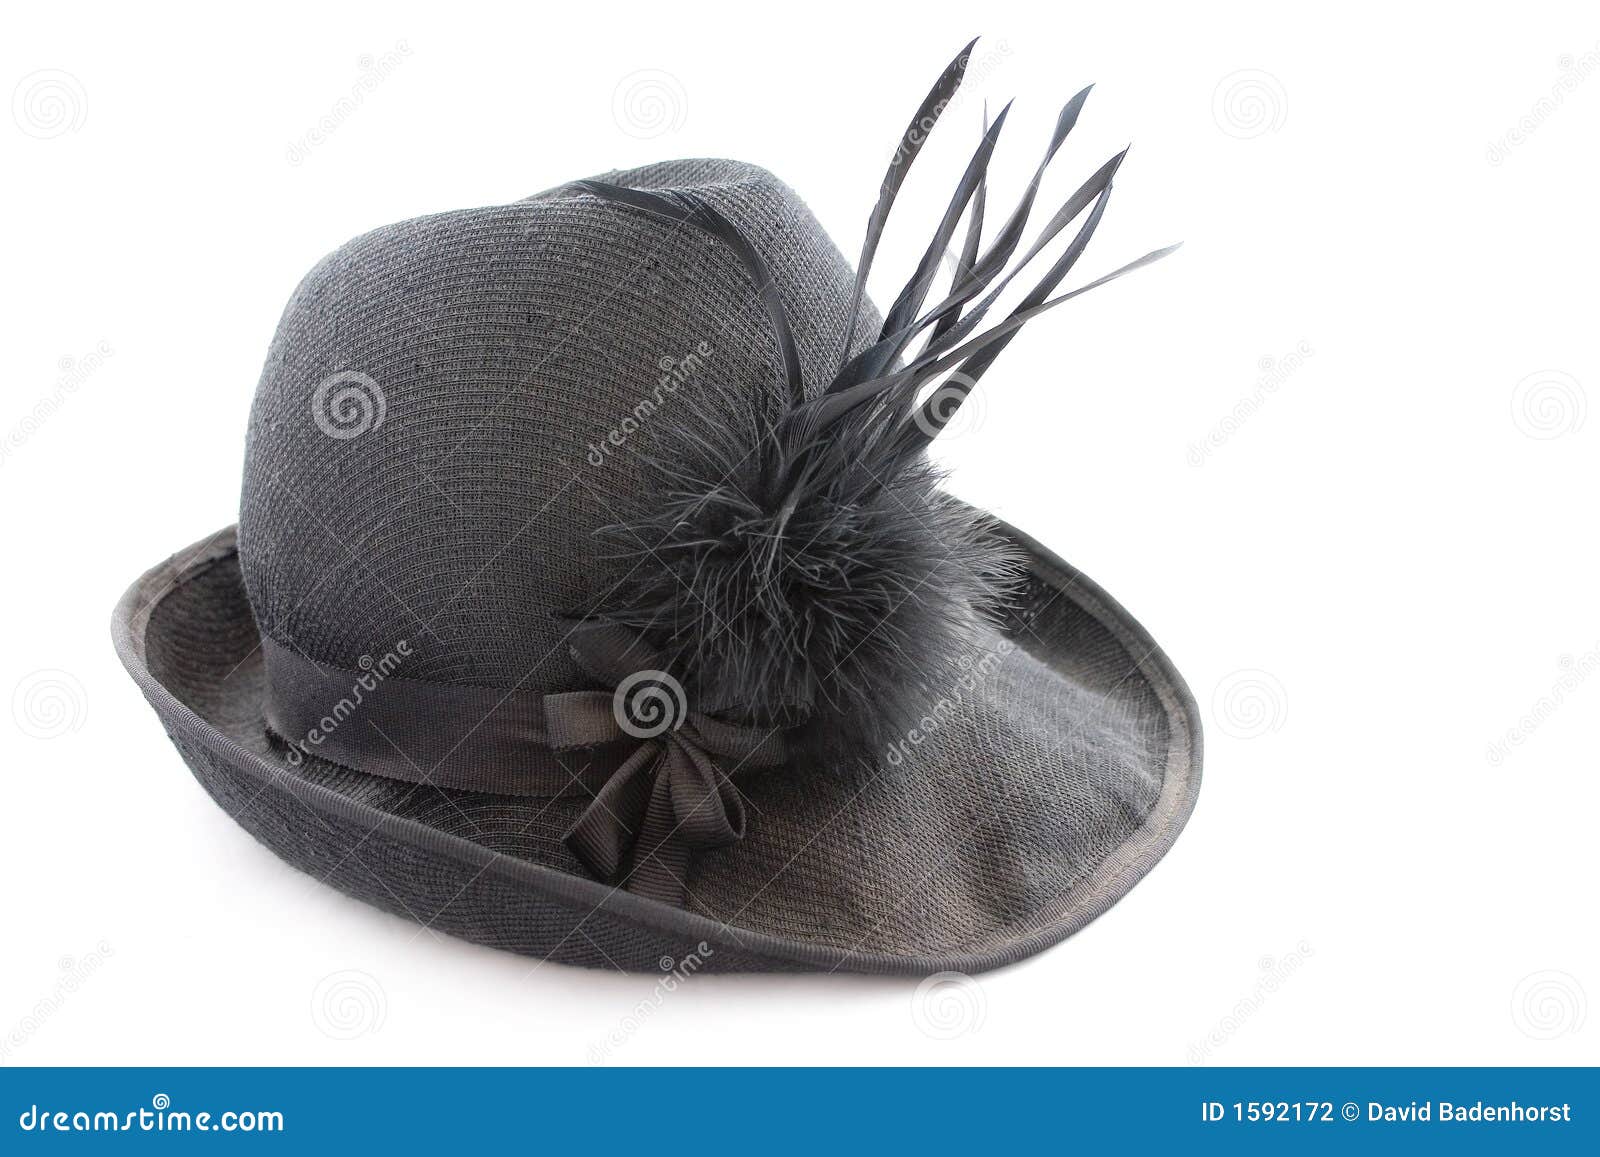 Vintage Black Feathered Hat Stock Photo - Image of class, head: 1592172